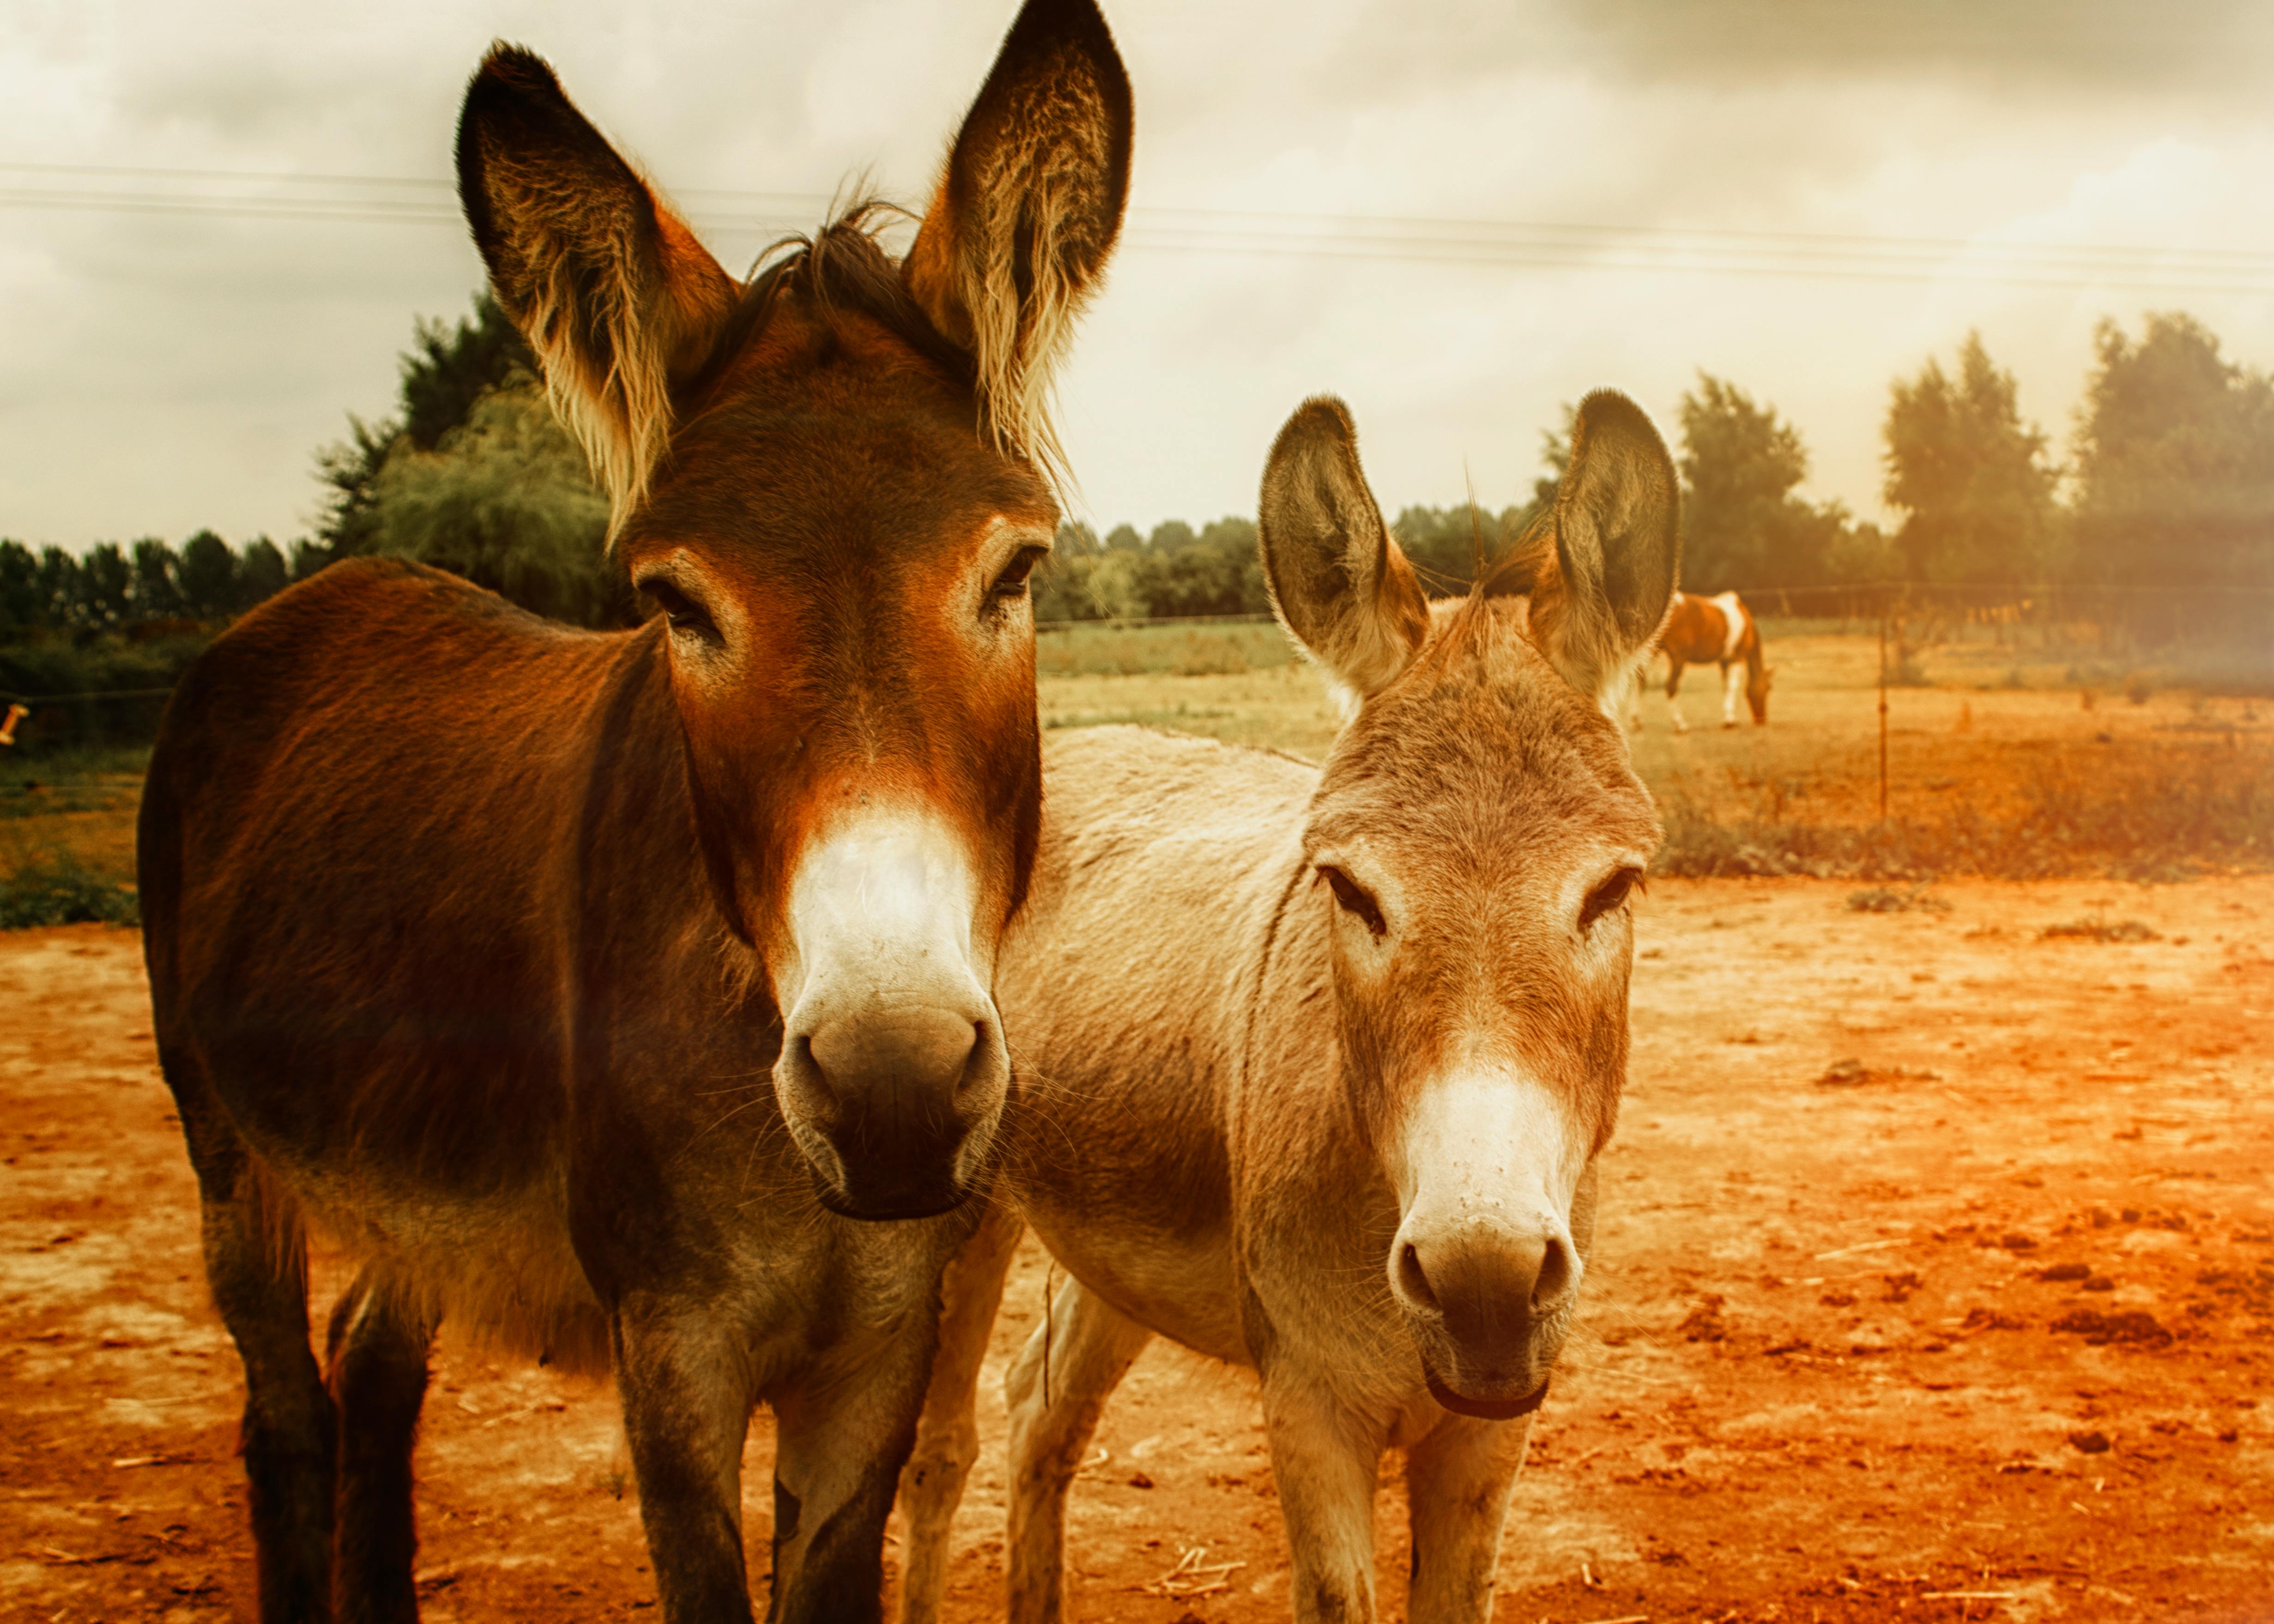 Wallpaper ID 279534  donkey animal fence and wire hd 4k wallpaper free  download